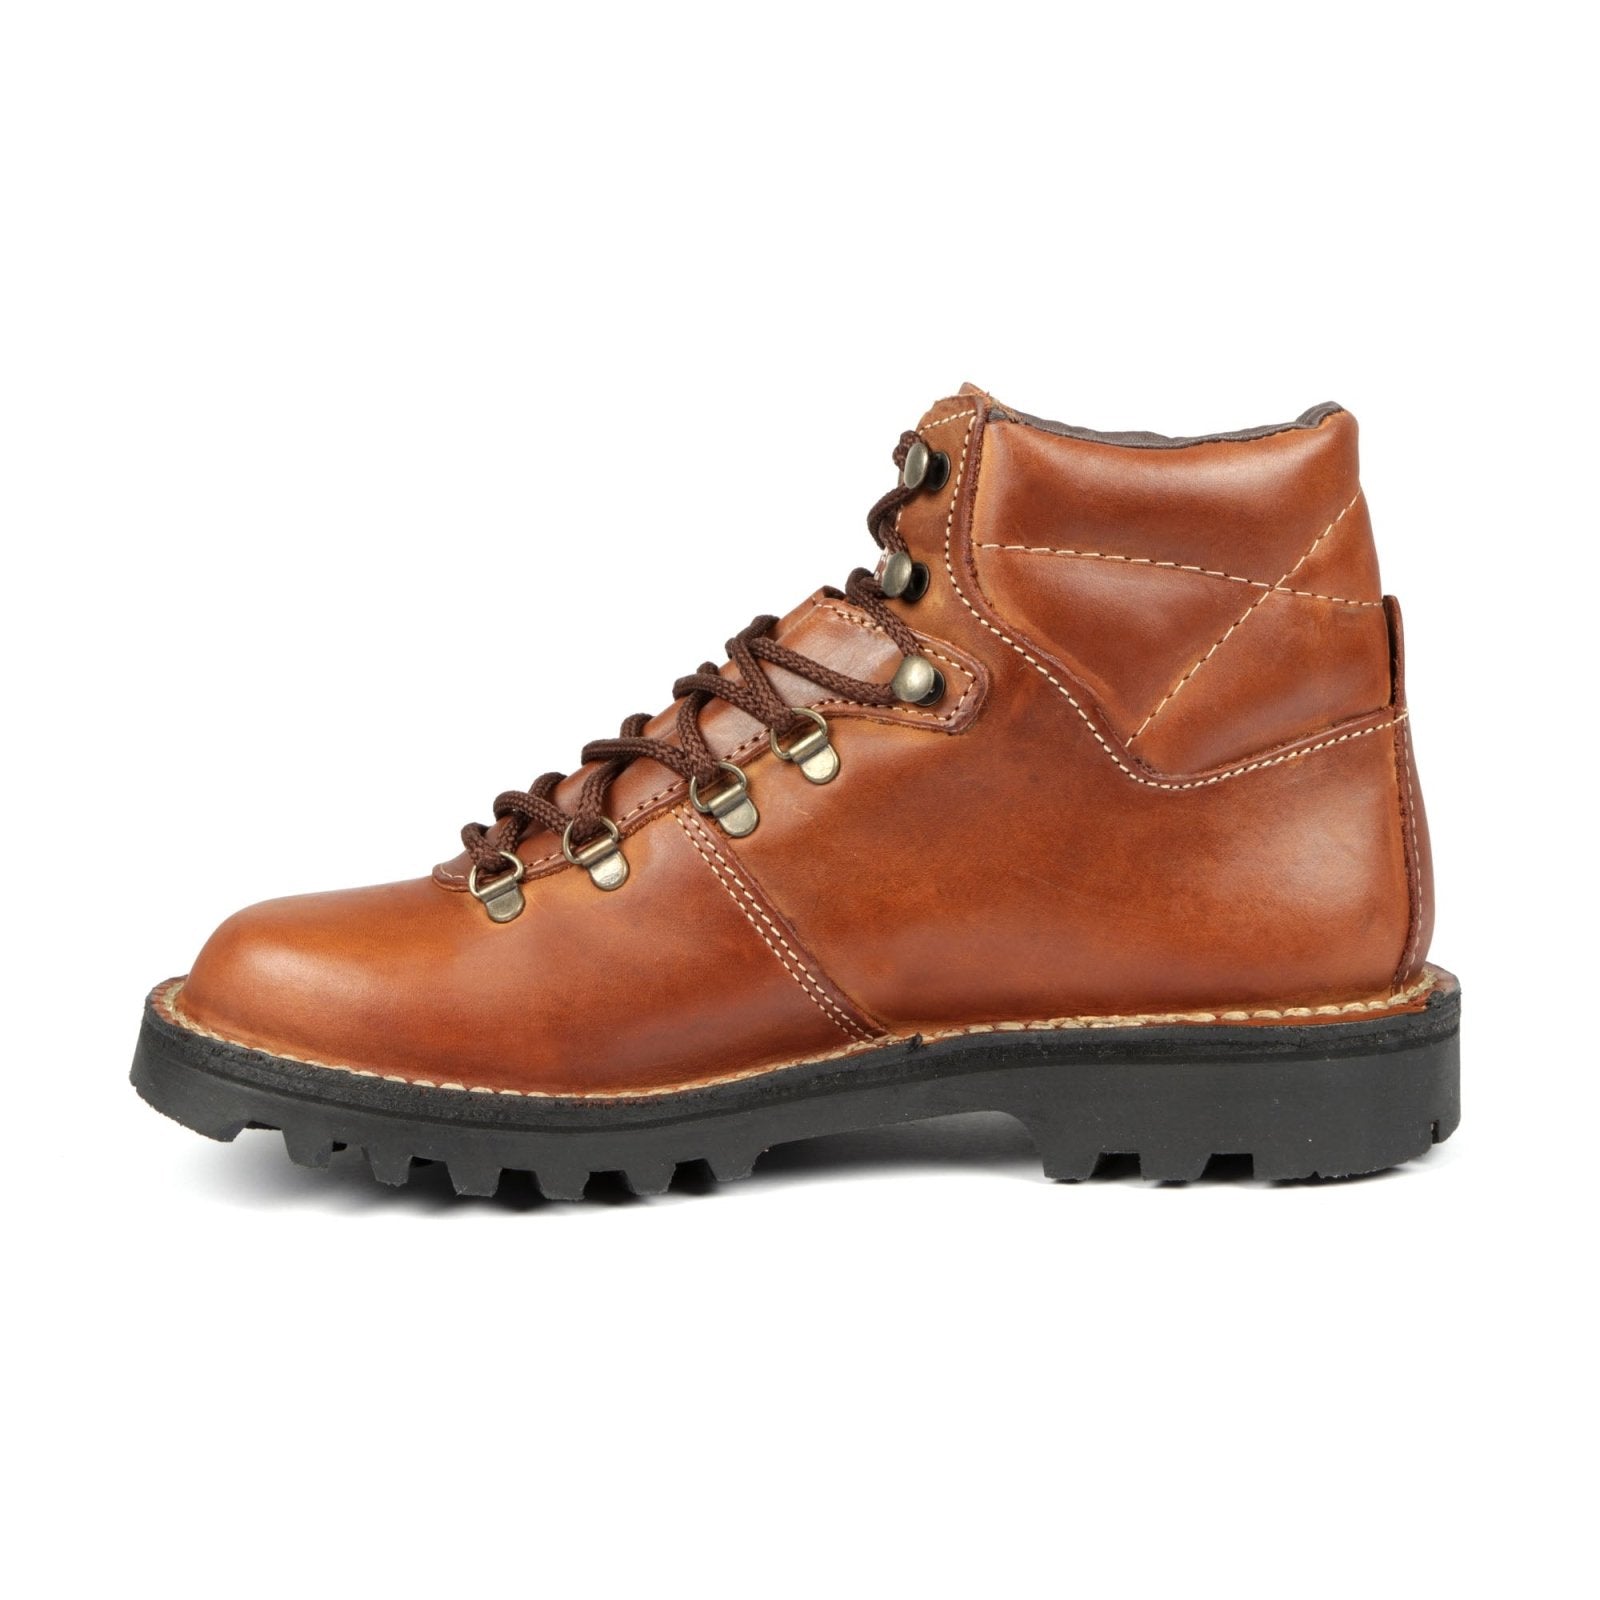 Seamus DKW Men's Premium Leather Boot w/ Cleated sole - Freestyle SA Proudly local leather boots veldskoens vellies leather shoes suede veldskoens